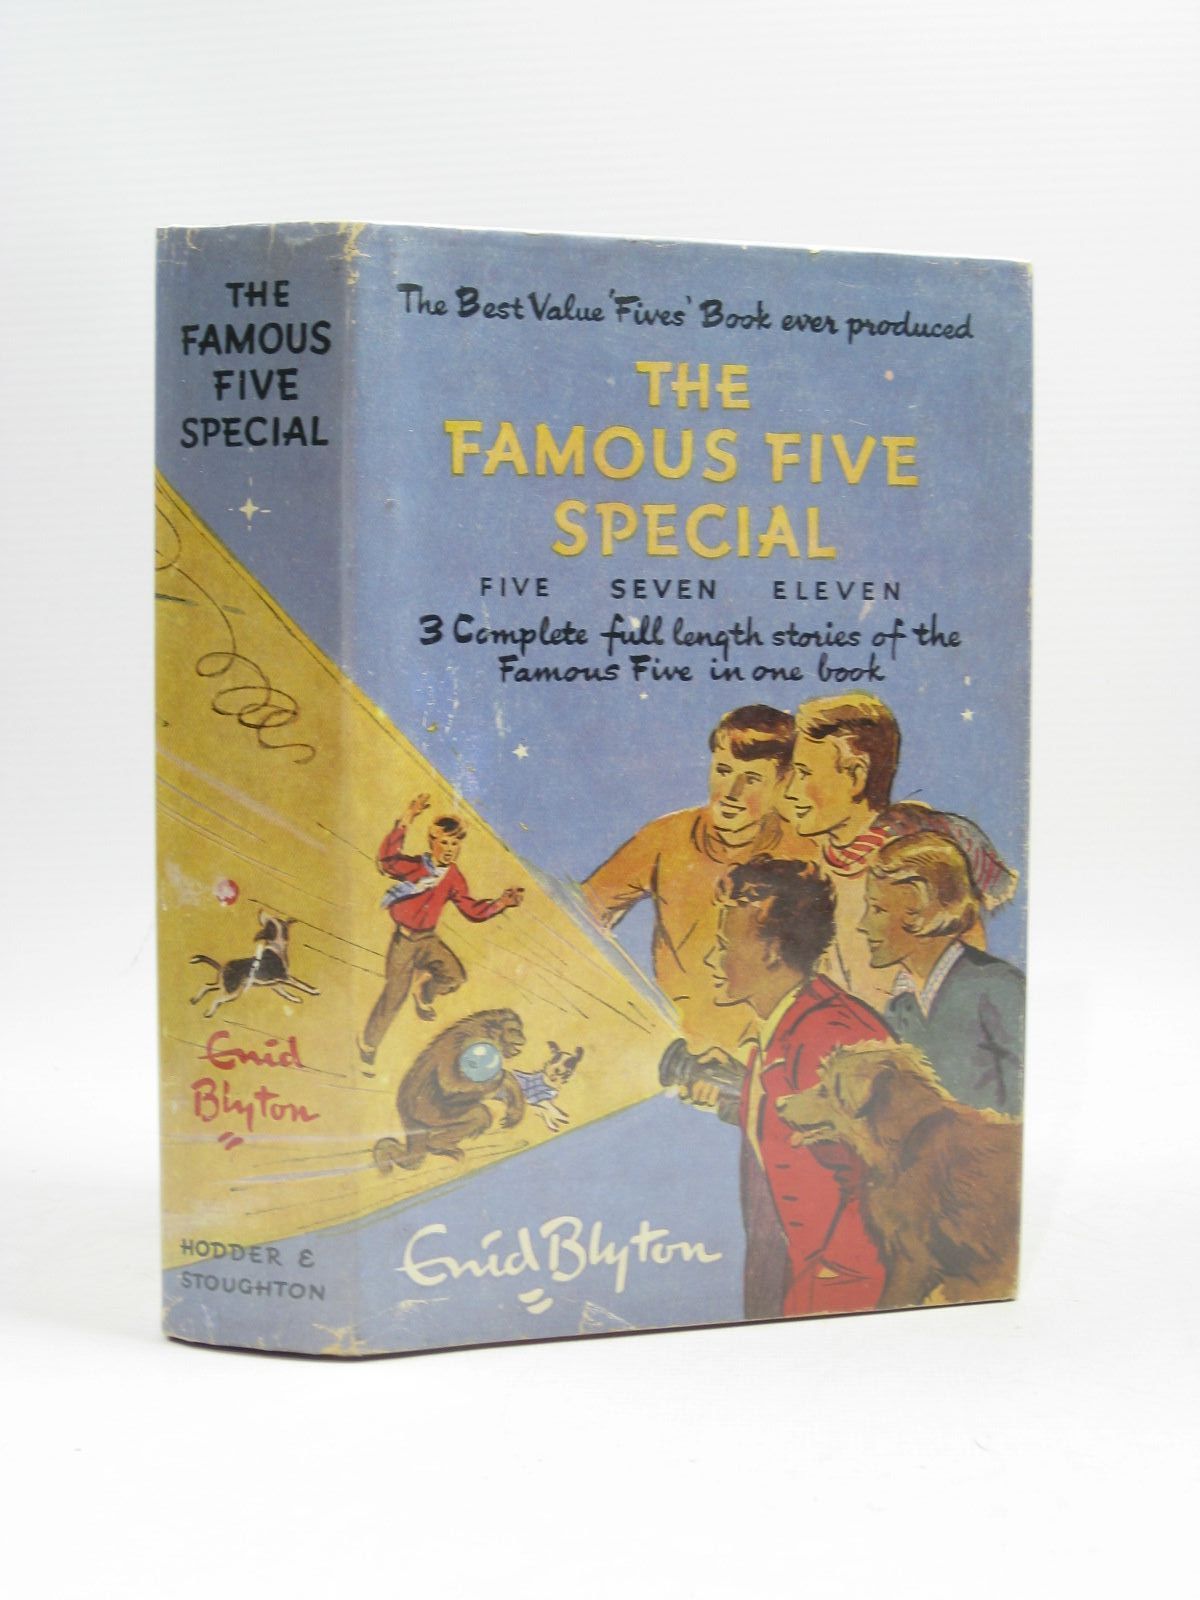 Cover of THE FAMOUS FIVE SPECIAL by Enid Blyton